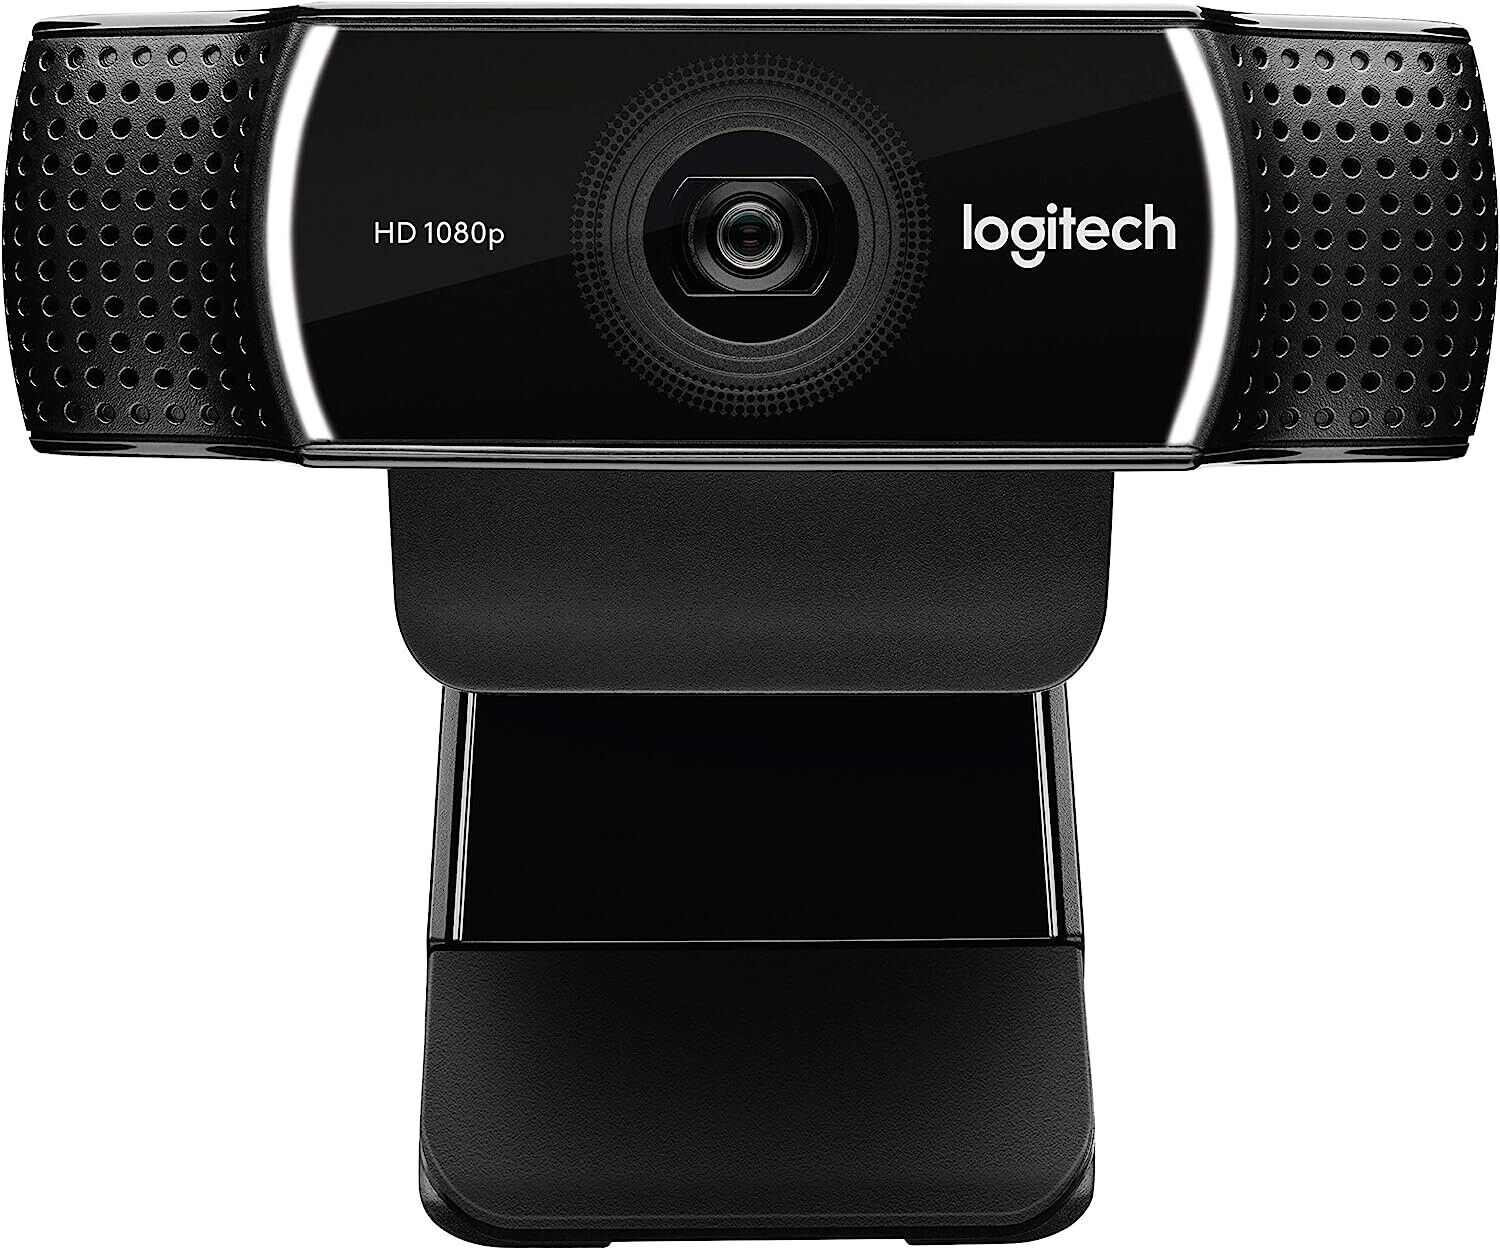 New Logitech 1080p Pro Stream Webcam for HD Video Streaming and Recording